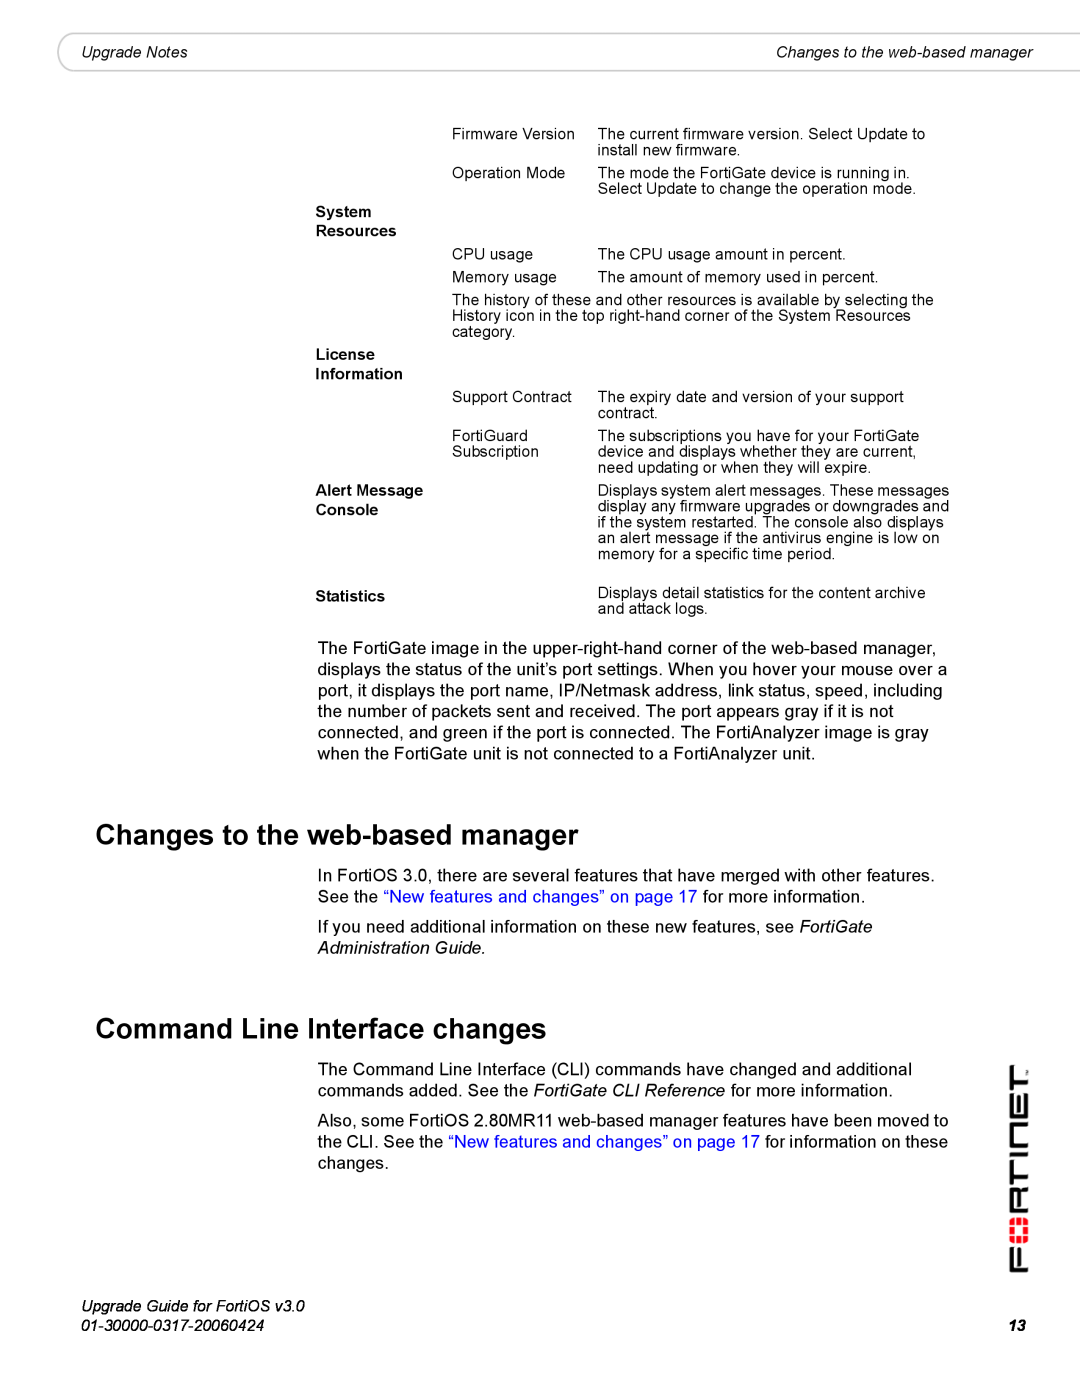 Fortinet FortiOS 3.0 manual Changes to the web-based manager, Command Line Interface changes, Administration Guide 